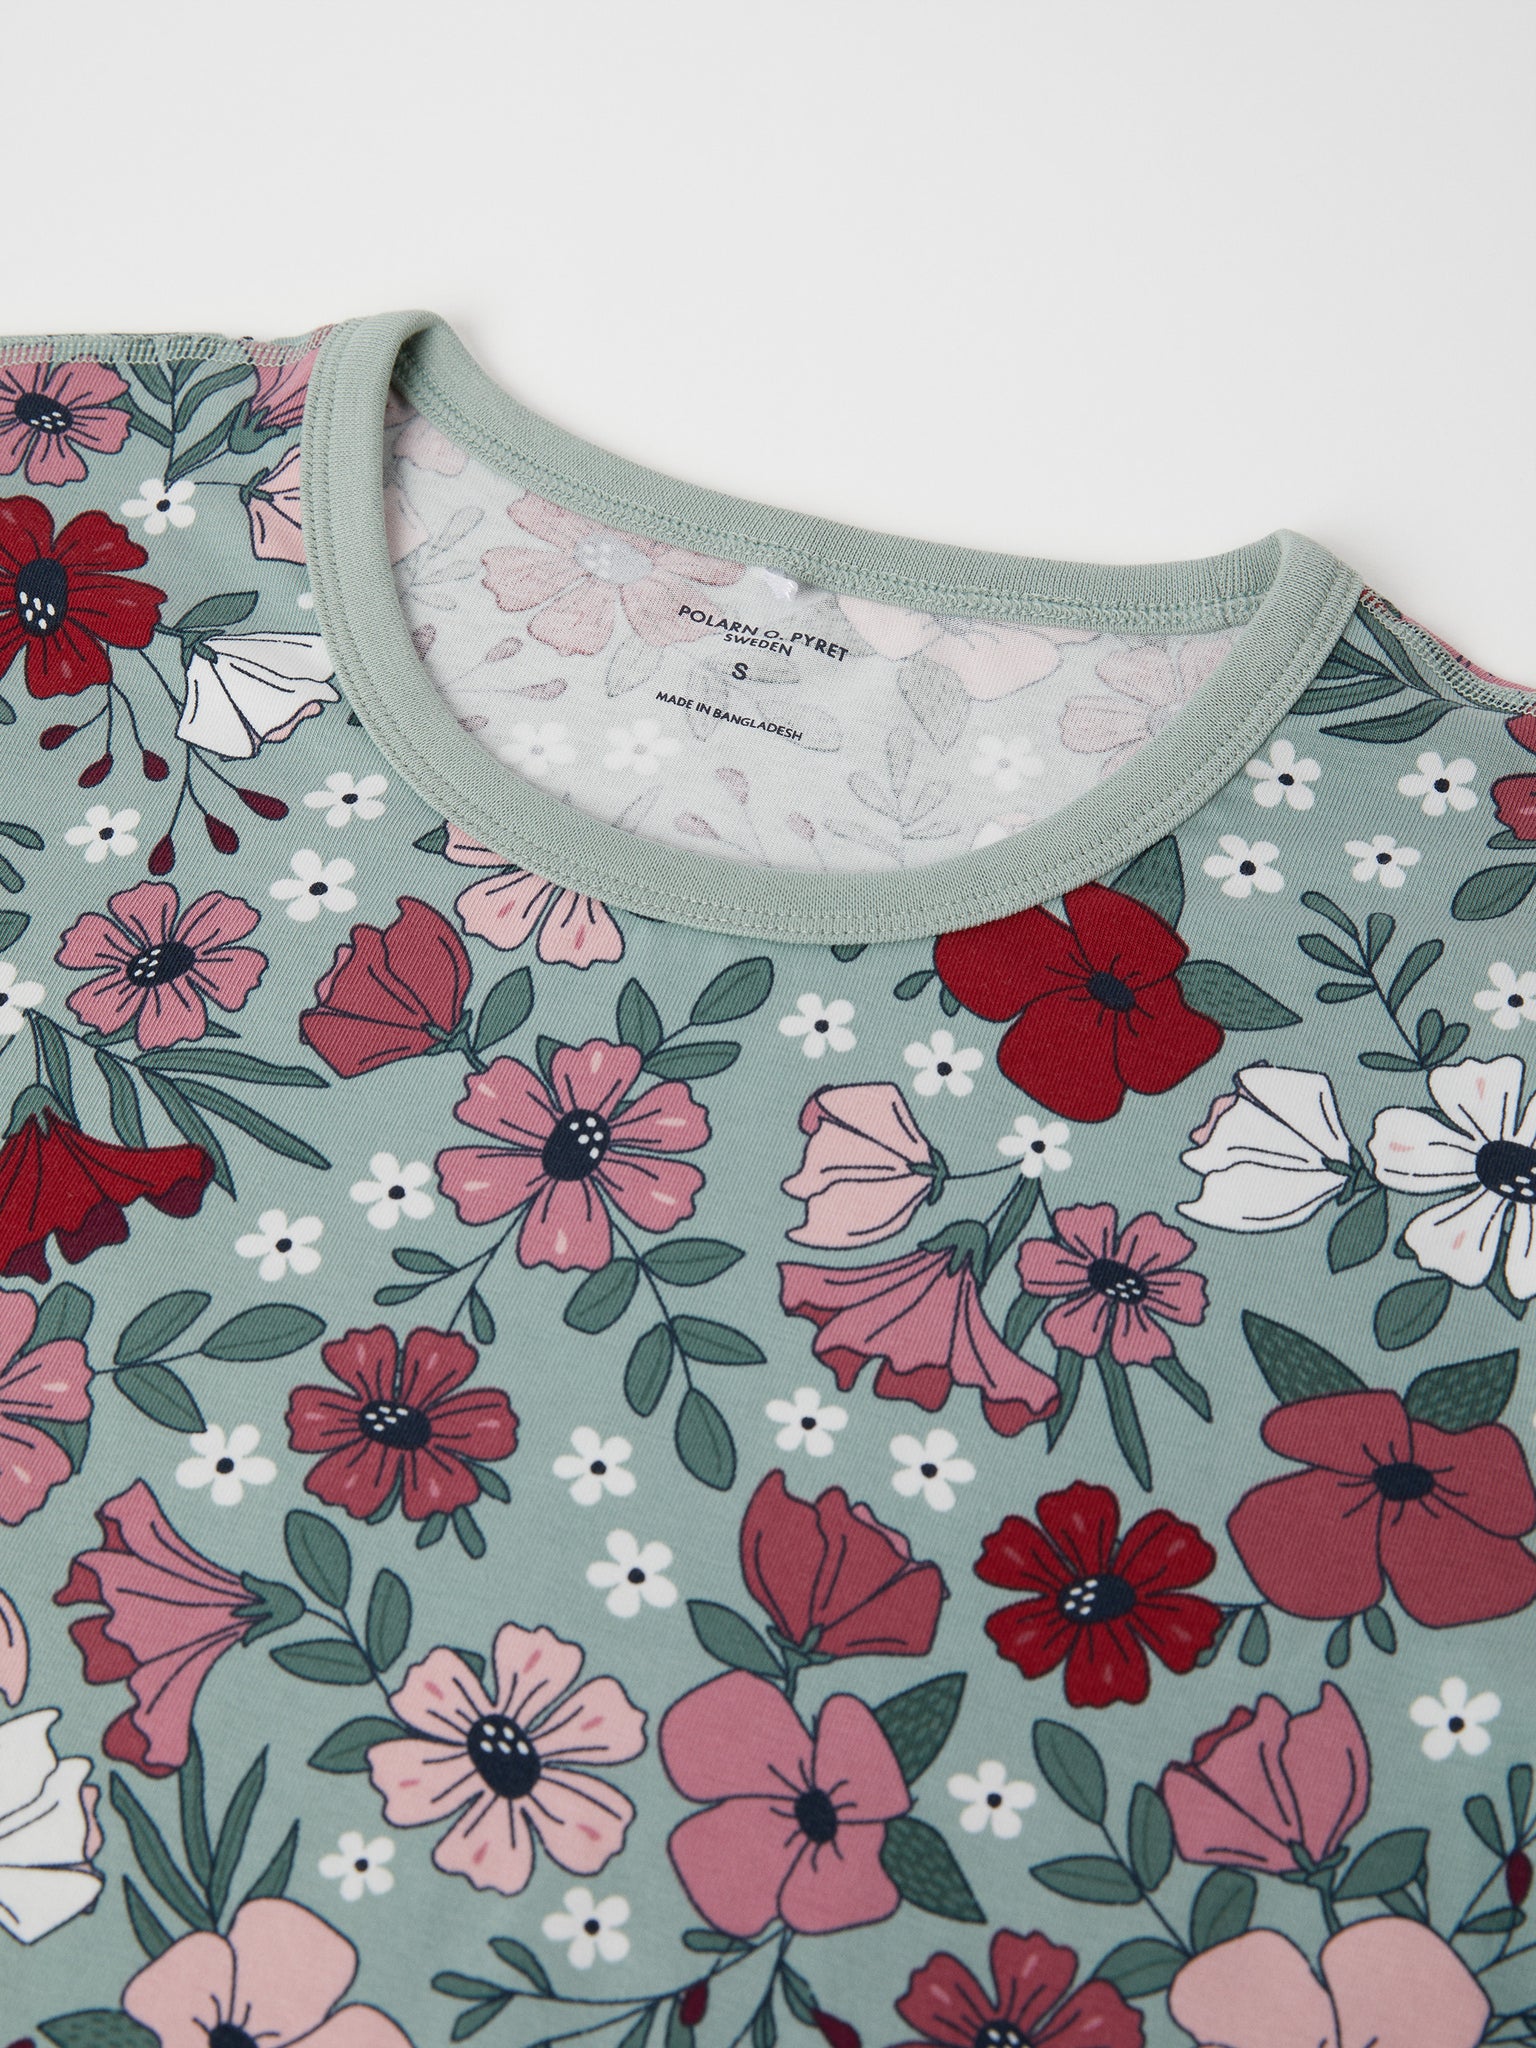 Floral Print Adult Pyjamas from the Polarn O. Pyret adult collection. Clothes made using sustainably sourced materials.